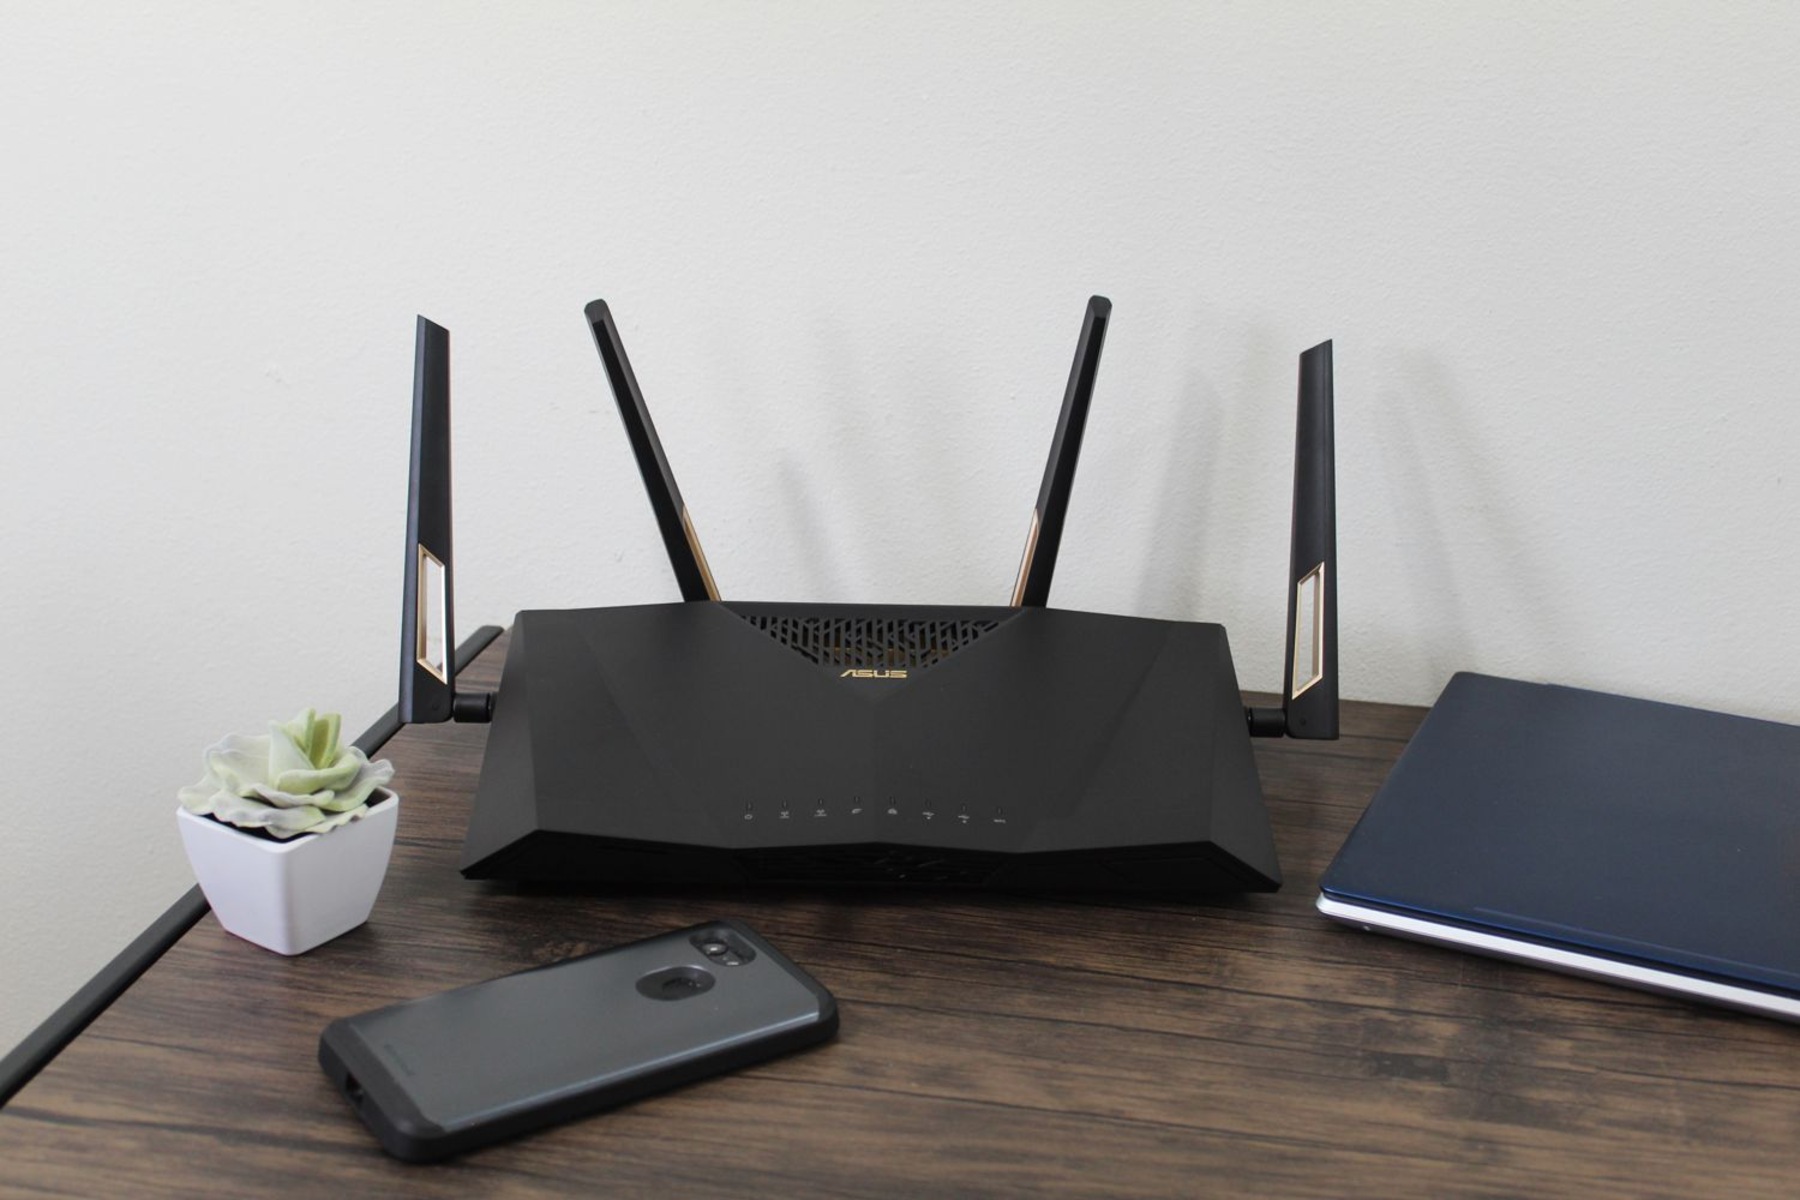 How To Set Up A 2Wire Wireless Router